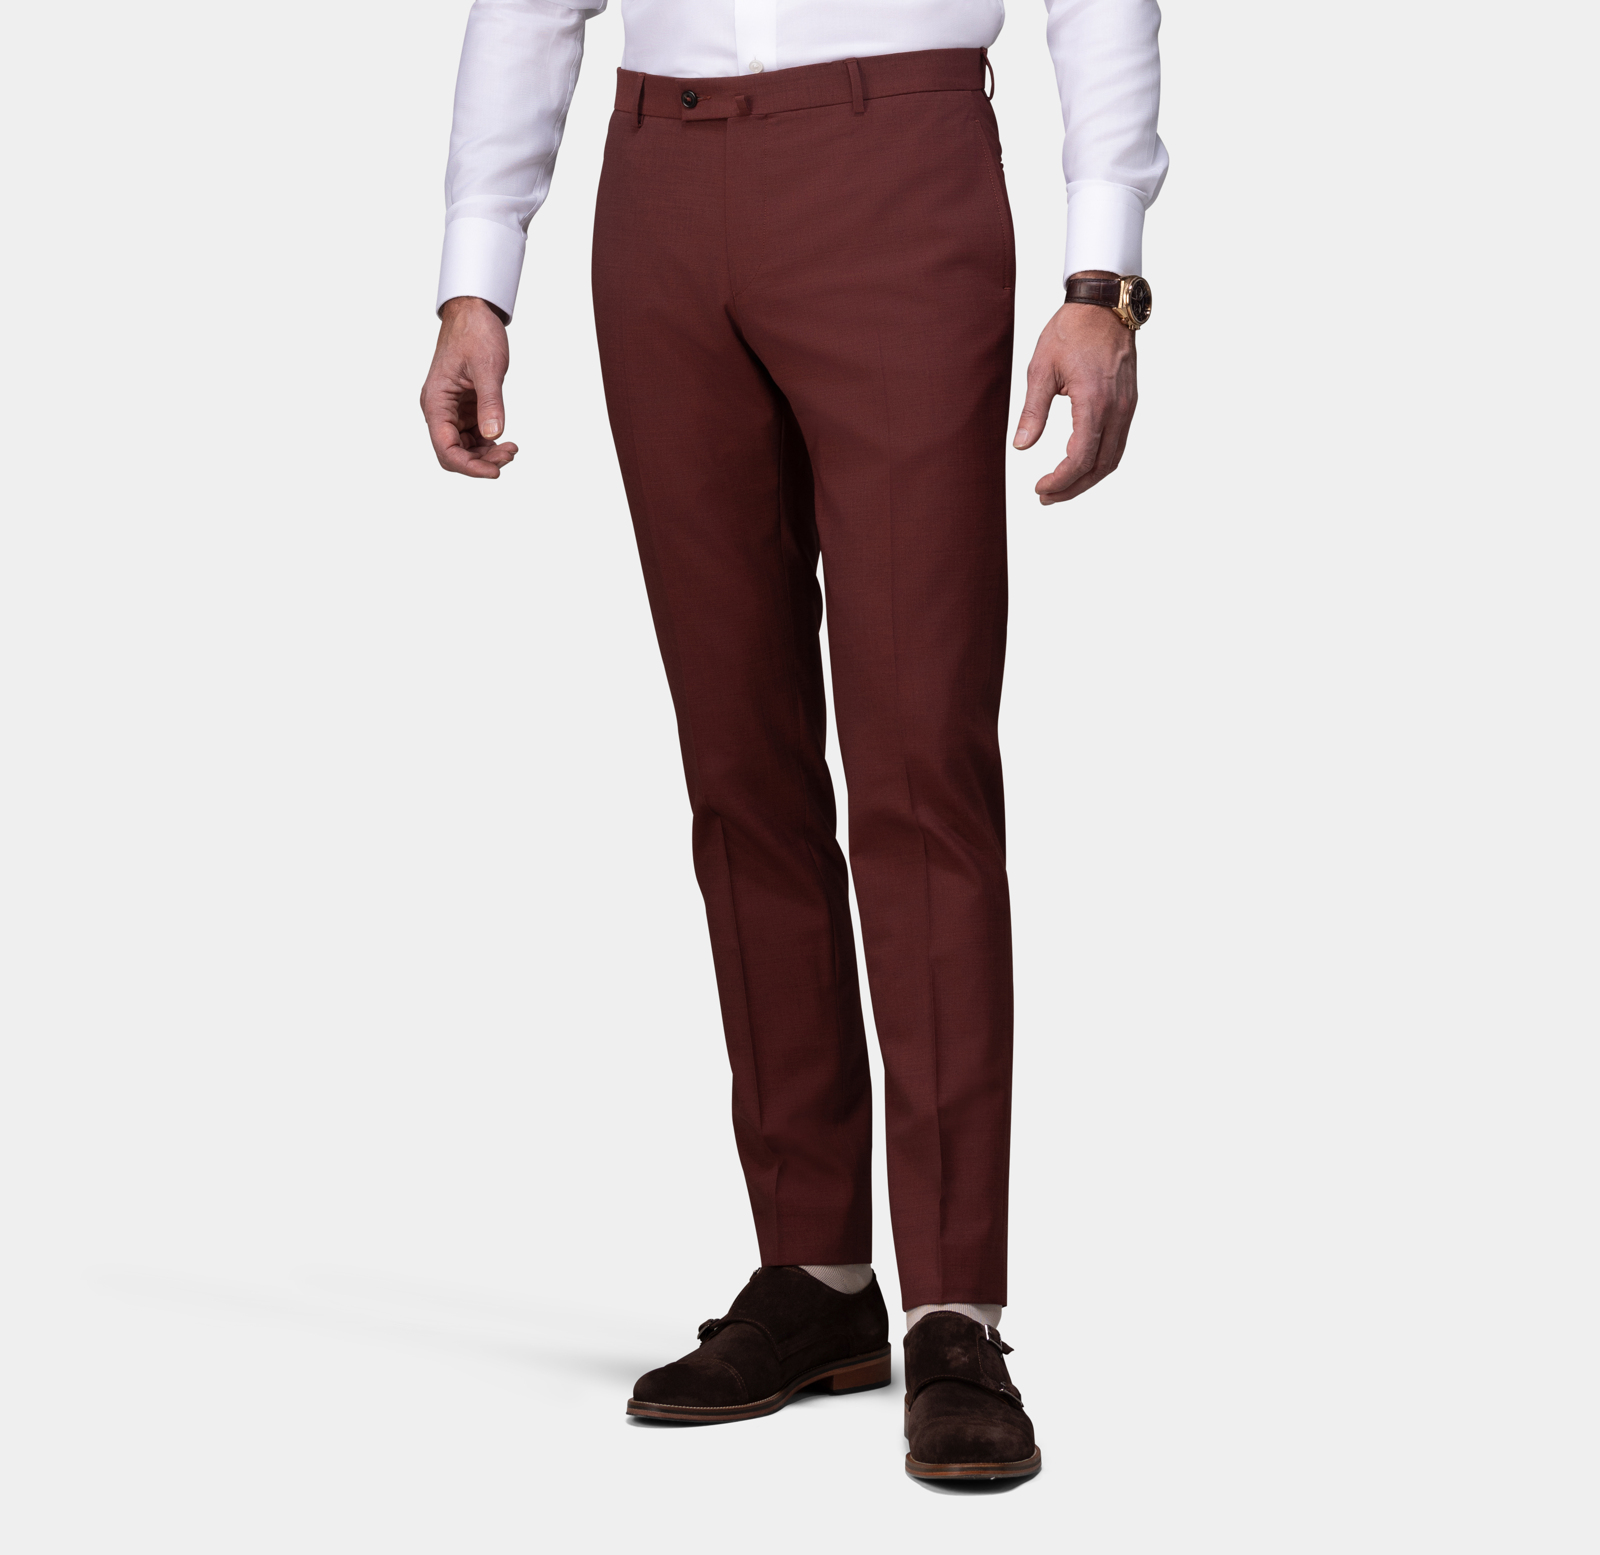 Dress to Impress: What to Wear With Burgundy Pants